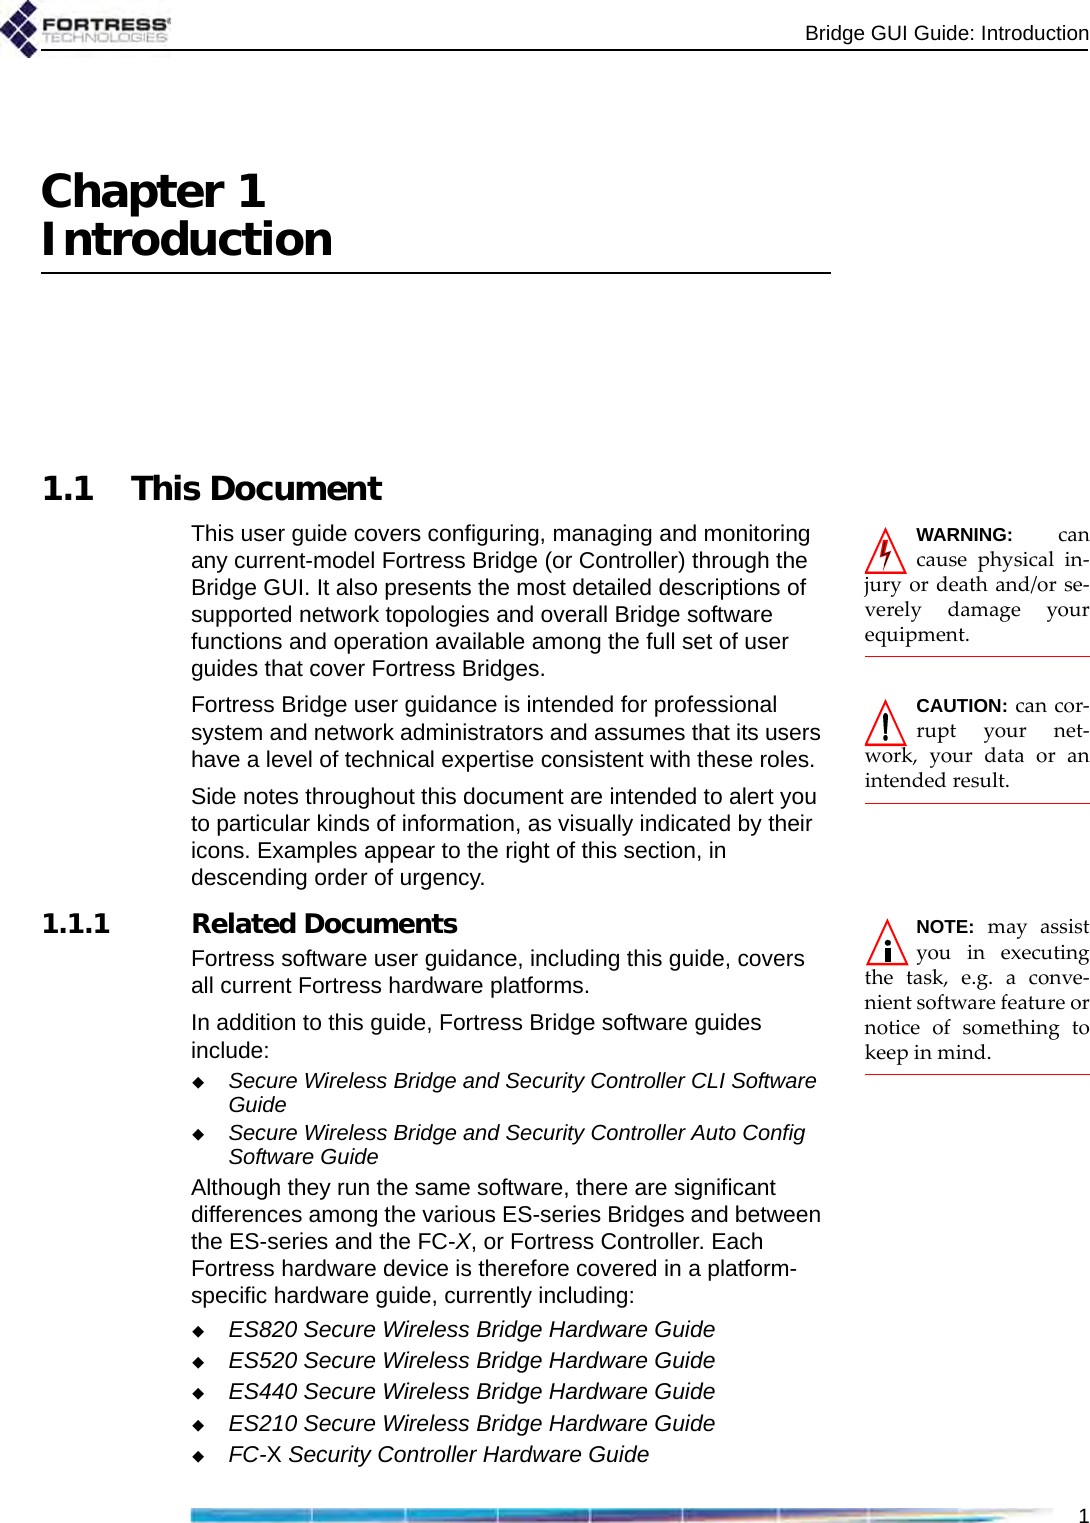 Bridge GUI Guide: Introduction1Chapter 1Introduction1.1 This DocumentWARNING: cancause physical in-jury or death and/or se-verely damage yourequipment.This user guide covers configuring, managing and monitoring any current-model Fortress Bridge (or Controller) through the Bridge GUI. It also presents the most detailed descriptions of supported network topologies and overall Bridge software functions and operation available among the full set of user guides that cover Fortress Bridges.CAUTION: can cor-rupt your net-work, your data or anintended result.Fortress Bridge user guidance is intended for professional system and network administrators and assumes that its users have a level of technical expertise consistent with these roles.Side notes throughout this document are intended to alert you to particular kinds of information, as visually indicated by their icons. Examples appear to the right of this section, in descending order of urgency.NOTE: may assistyou in executingthe task, e.g. a conve-nient software feature ornotice of something tokeep in mind.   1.1.1 Related DocumentsFortress software user guidance, including this guide, covers all current Fortress hardware platforms. In addition to this guide, Fortress Bridge software guides include:Secure Wireless Bridge and Security Controller CLI Software GuideSecure Wireless Bridge and Security Controller Auto Config Software GuideAlthough they run the same software, there are significant differences among the various ES-series Bridges and between the ES-series and the FC-X, or Fortress Controller. Each Fortress hardware device is therefore covered in a platform-specific hardware guide, currently including:ES820 Secure Wireless Bridge Hardware GuideES520 Secure Wireless Bridge Hardware GuideES440 Secure Wireless Bridge Hardware GuideES210 Secure Wireless Bridge Hardware GuideFC-X Security Controller Hardware Guide